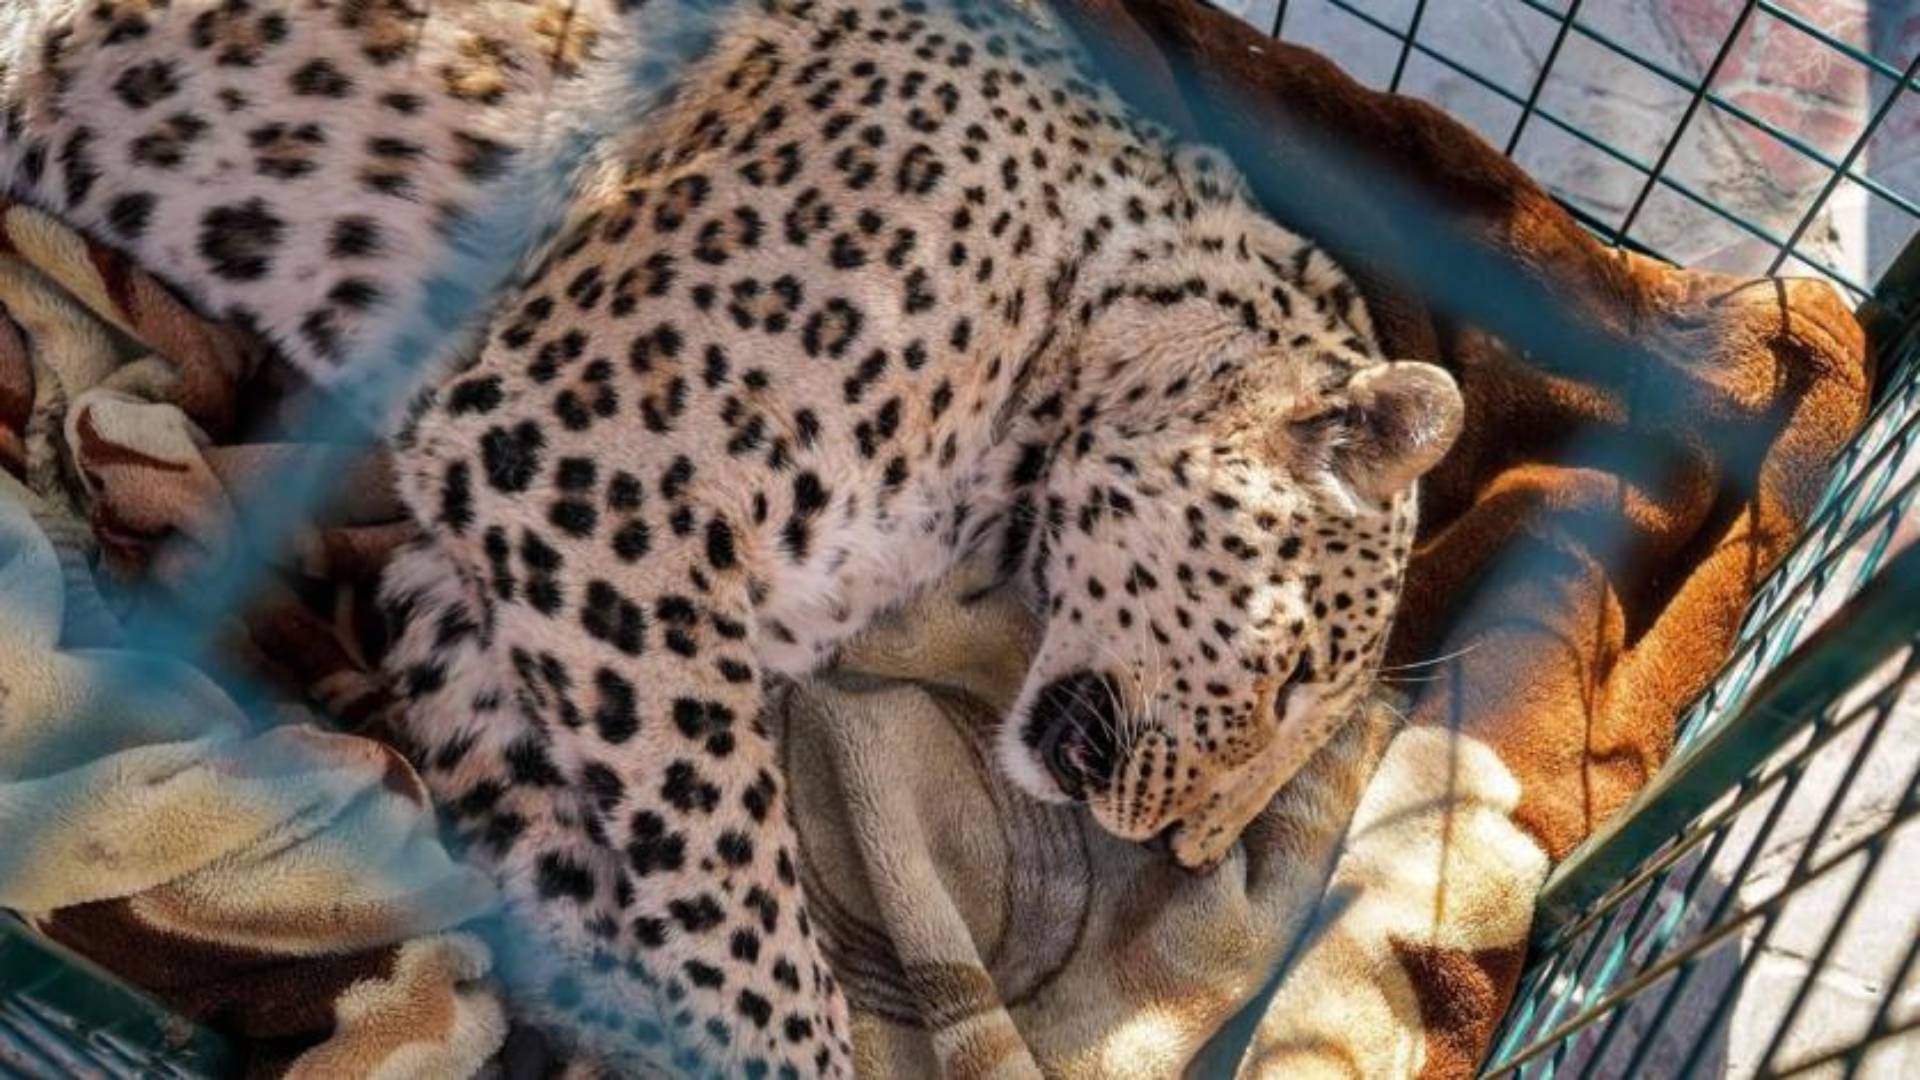  A leopard that underwent hind leg amputation surgery lies in a cage at the Duhok Zoo in the north of Iraq's northern autonomous Kurdish region on December 31, 2021. (Photo by Ismael ADNAN / AFP)